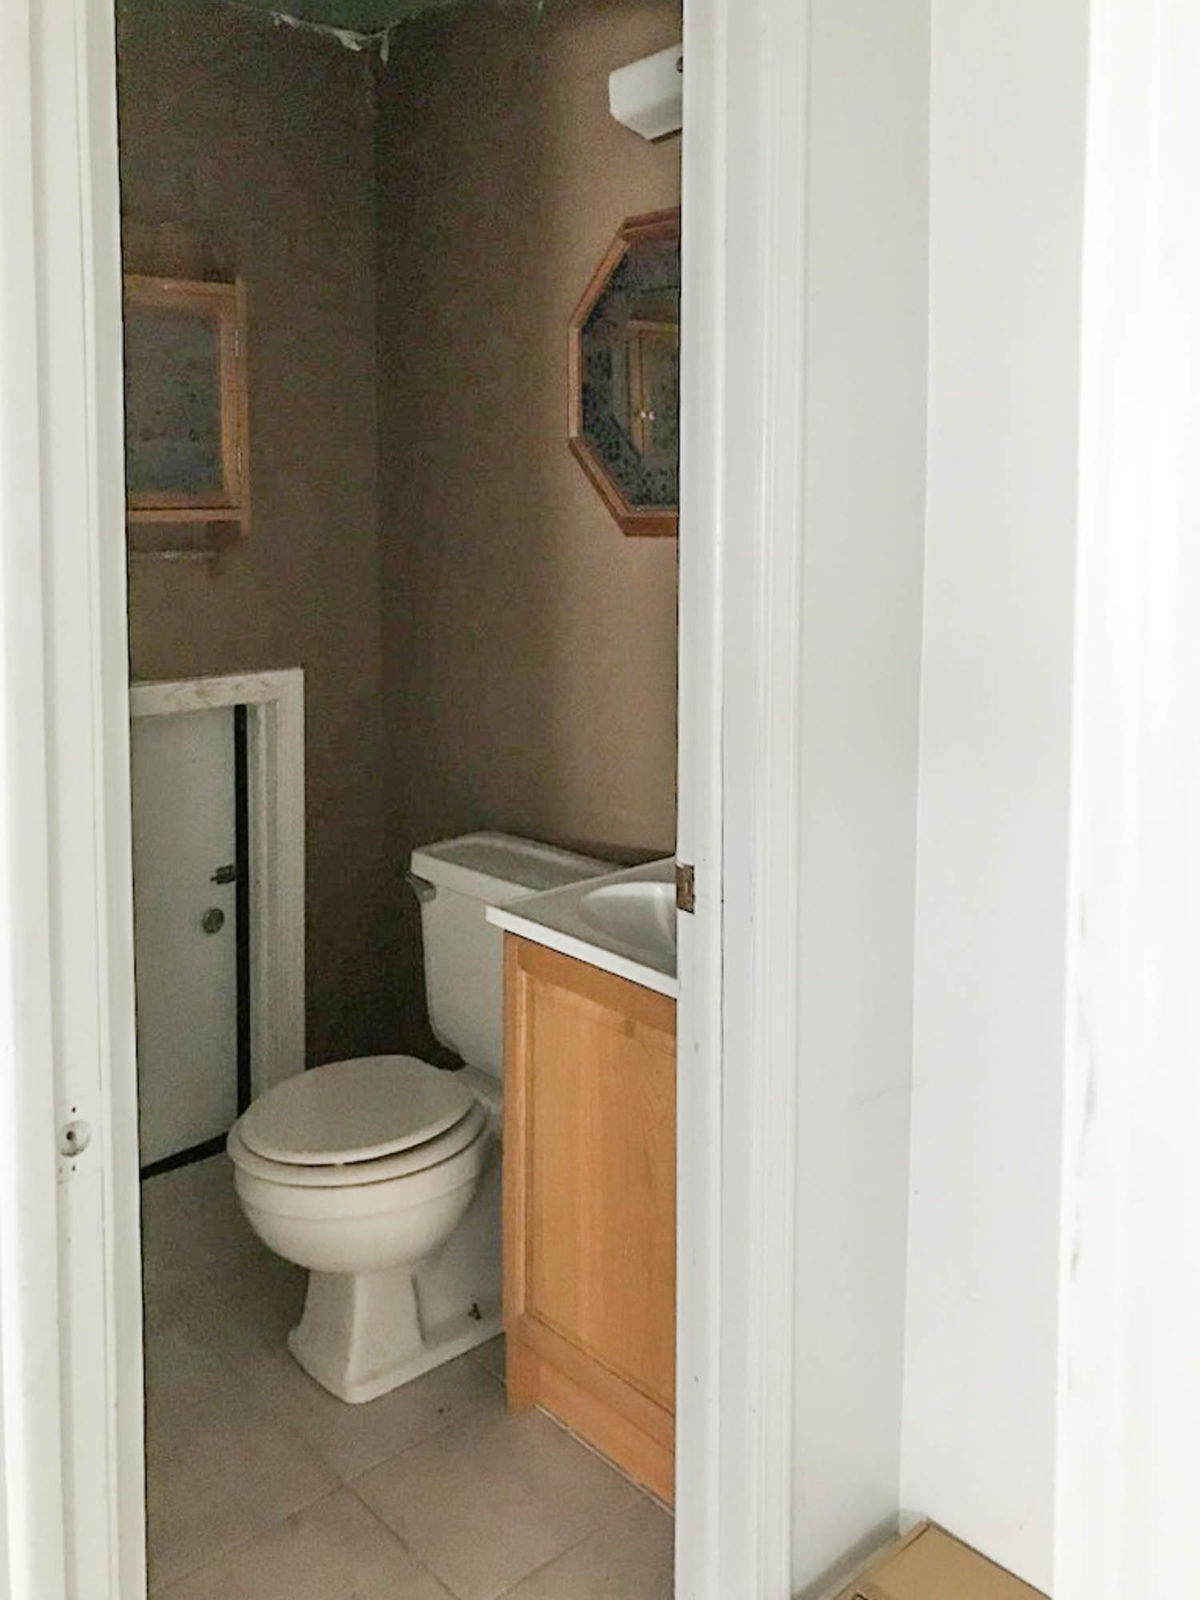 Our Downstairs Bathroom Reveal - The Wood Grain Cottage